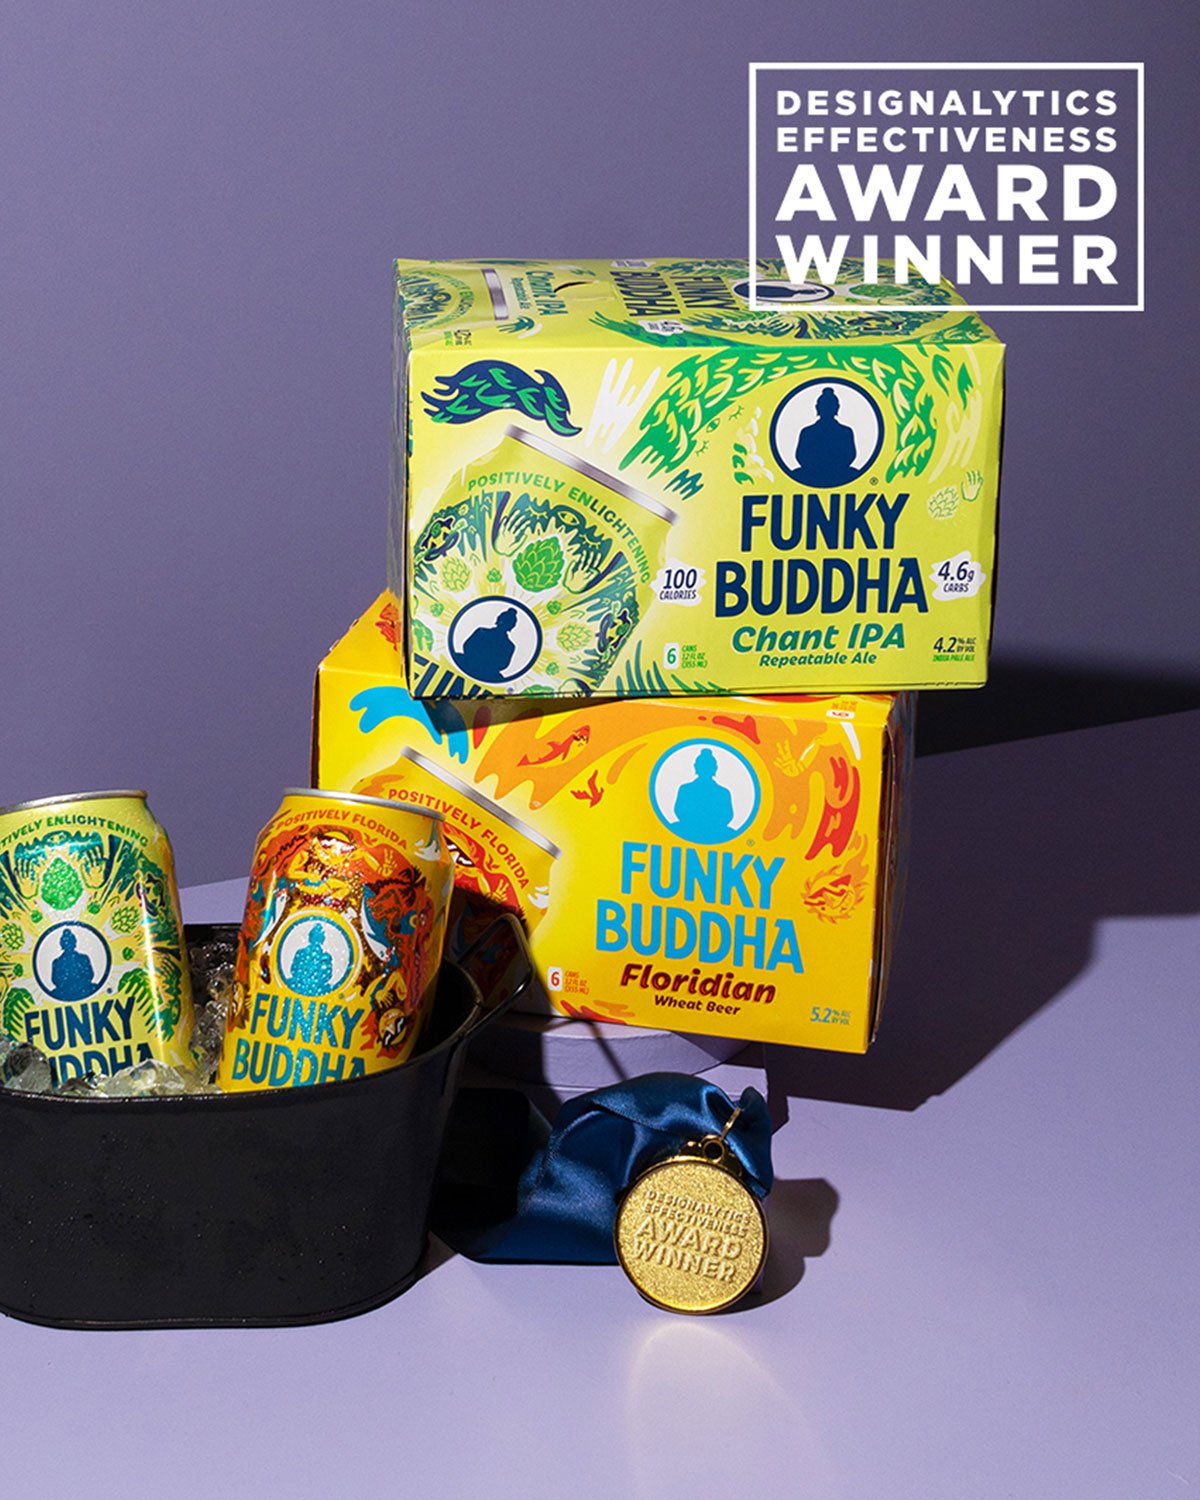 Funky Buddha&rsquo;s Colorful and Quirky Redesign Leads to Sunny Sales Numbers